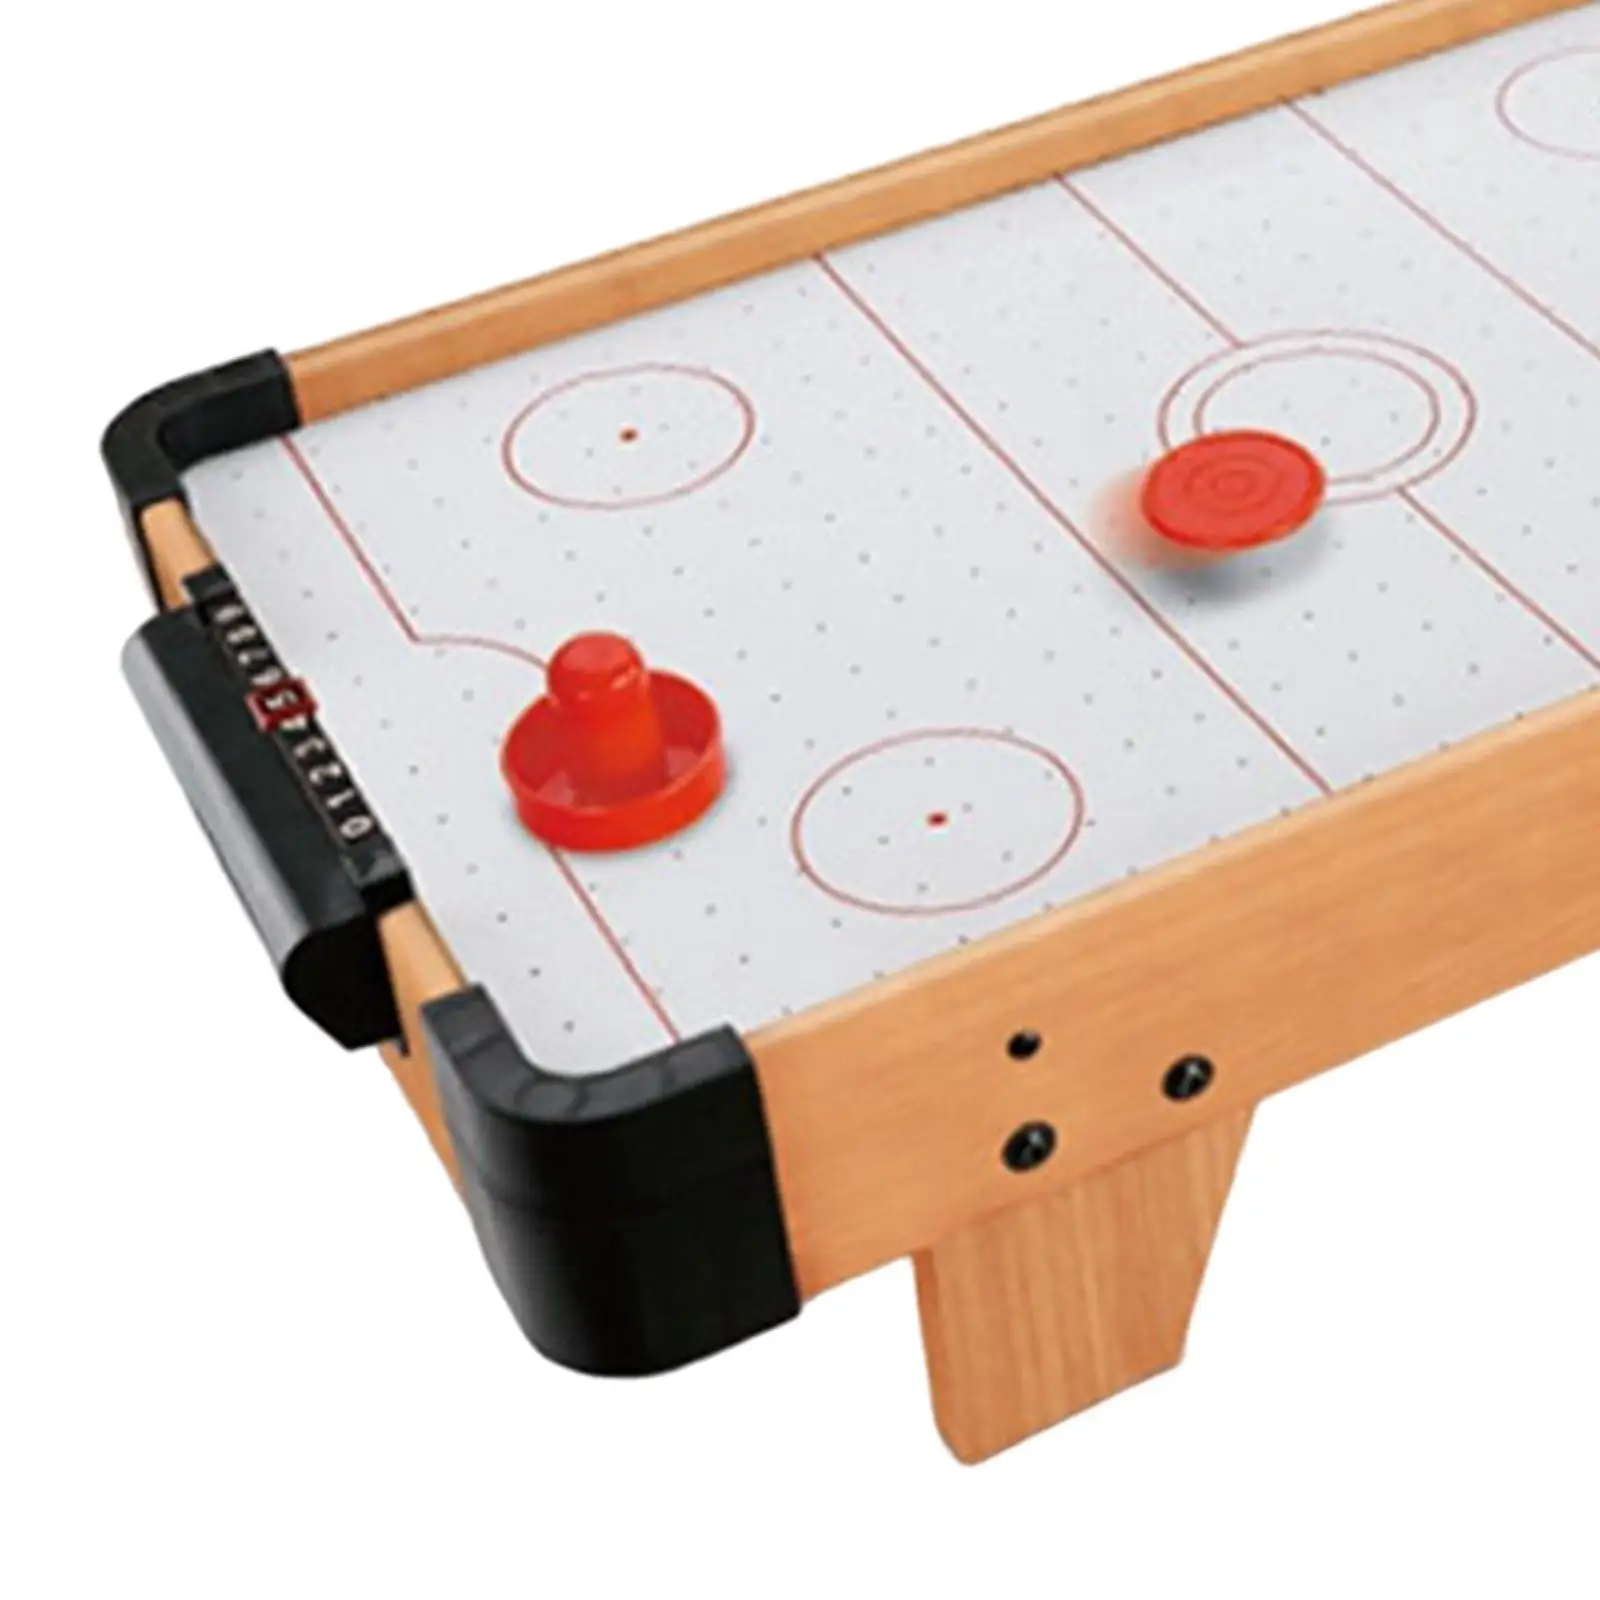 Air Hockey Table Battle Game Parent Child Interactive Desktop Playing Field with Sliders and Pucks Party for Kids Adults Toddler